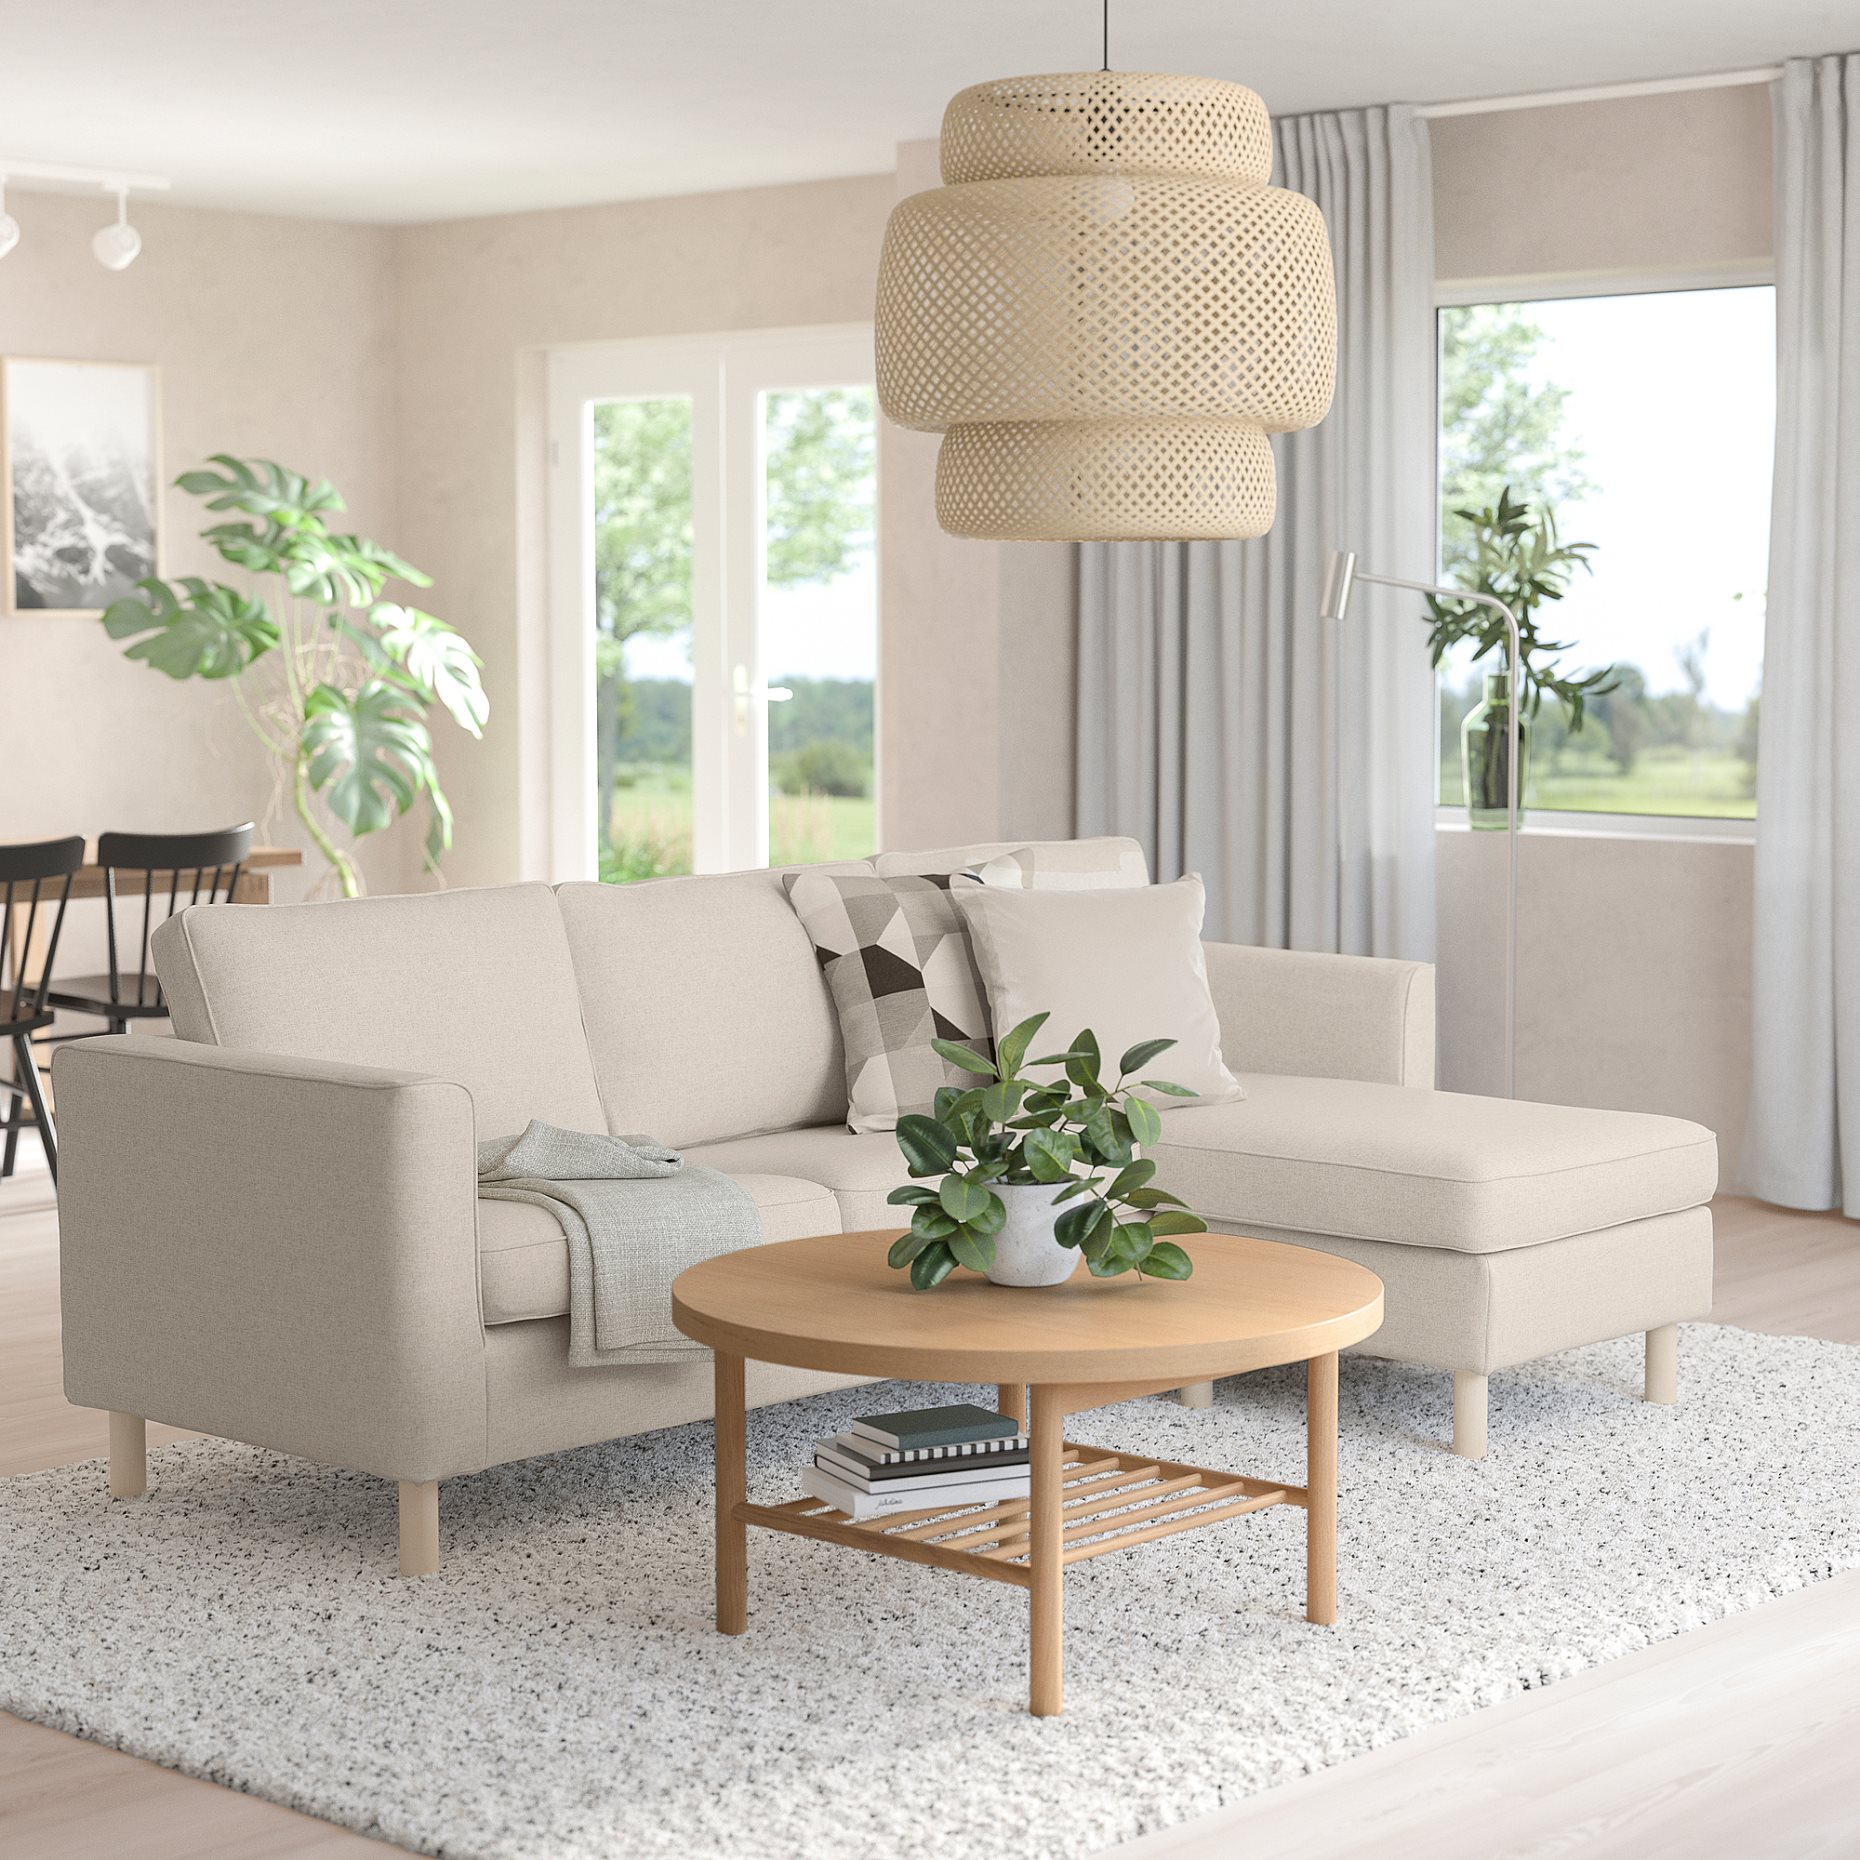 PÄRUP, 3-seat sofa with chaise longue, 093.898.31